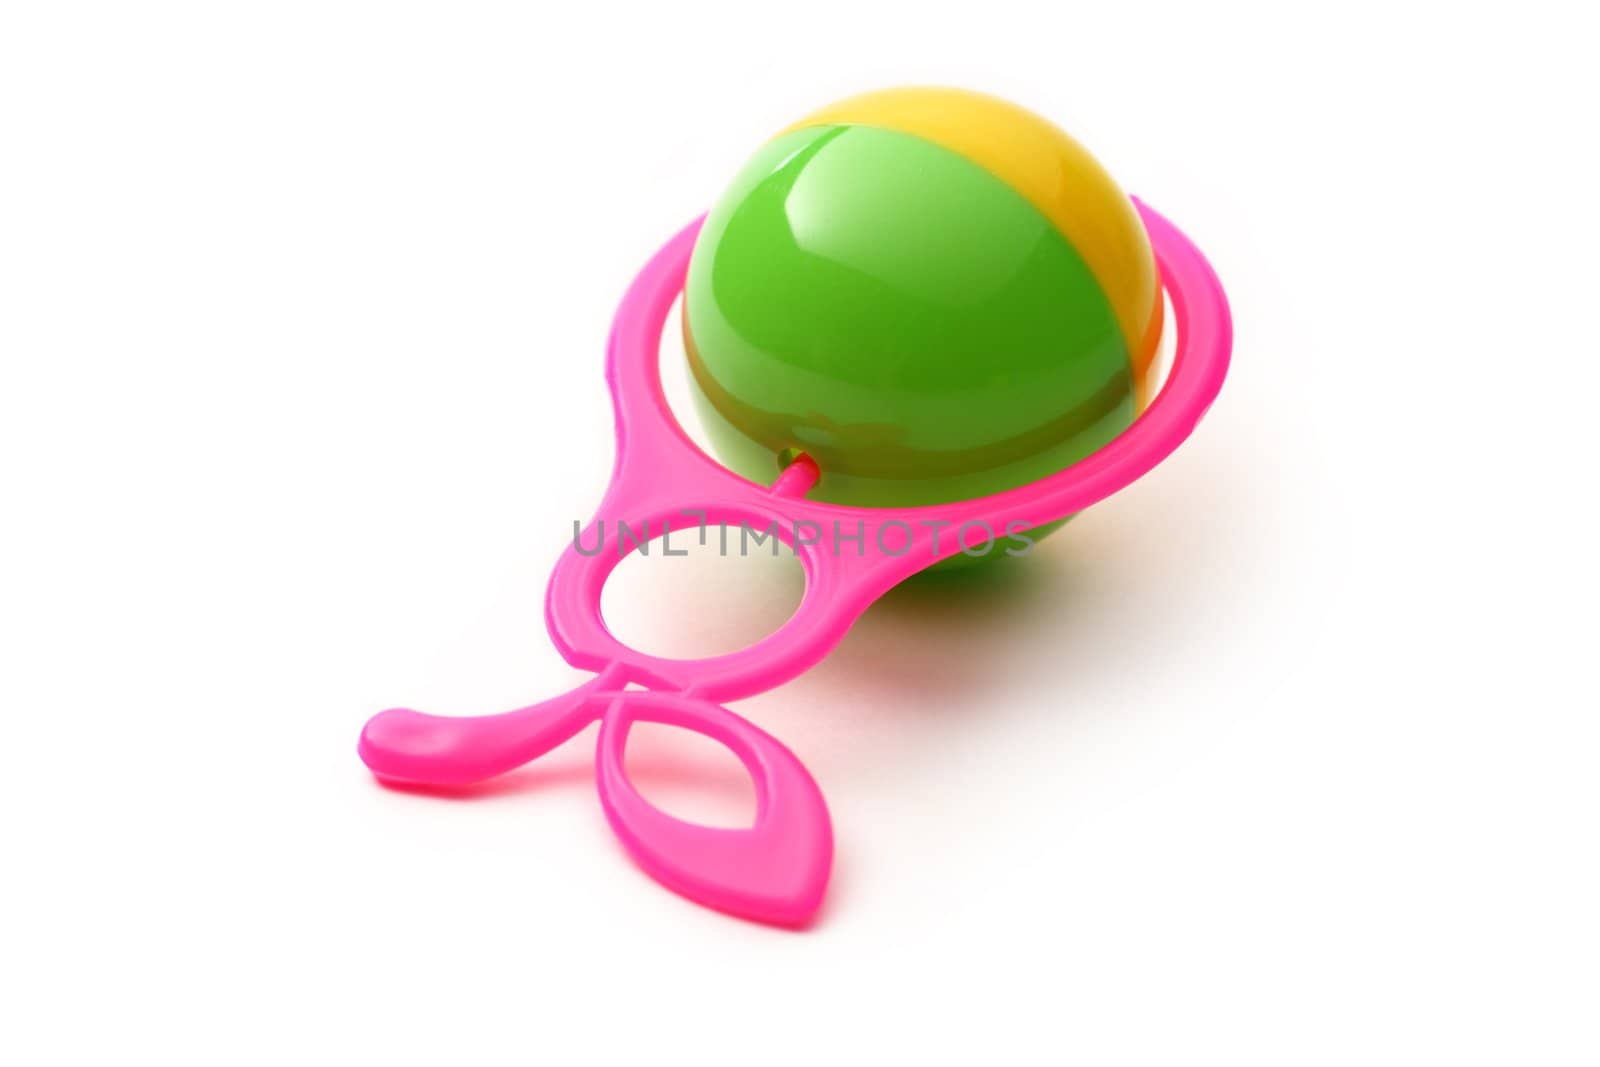 Colourful rattle on white background